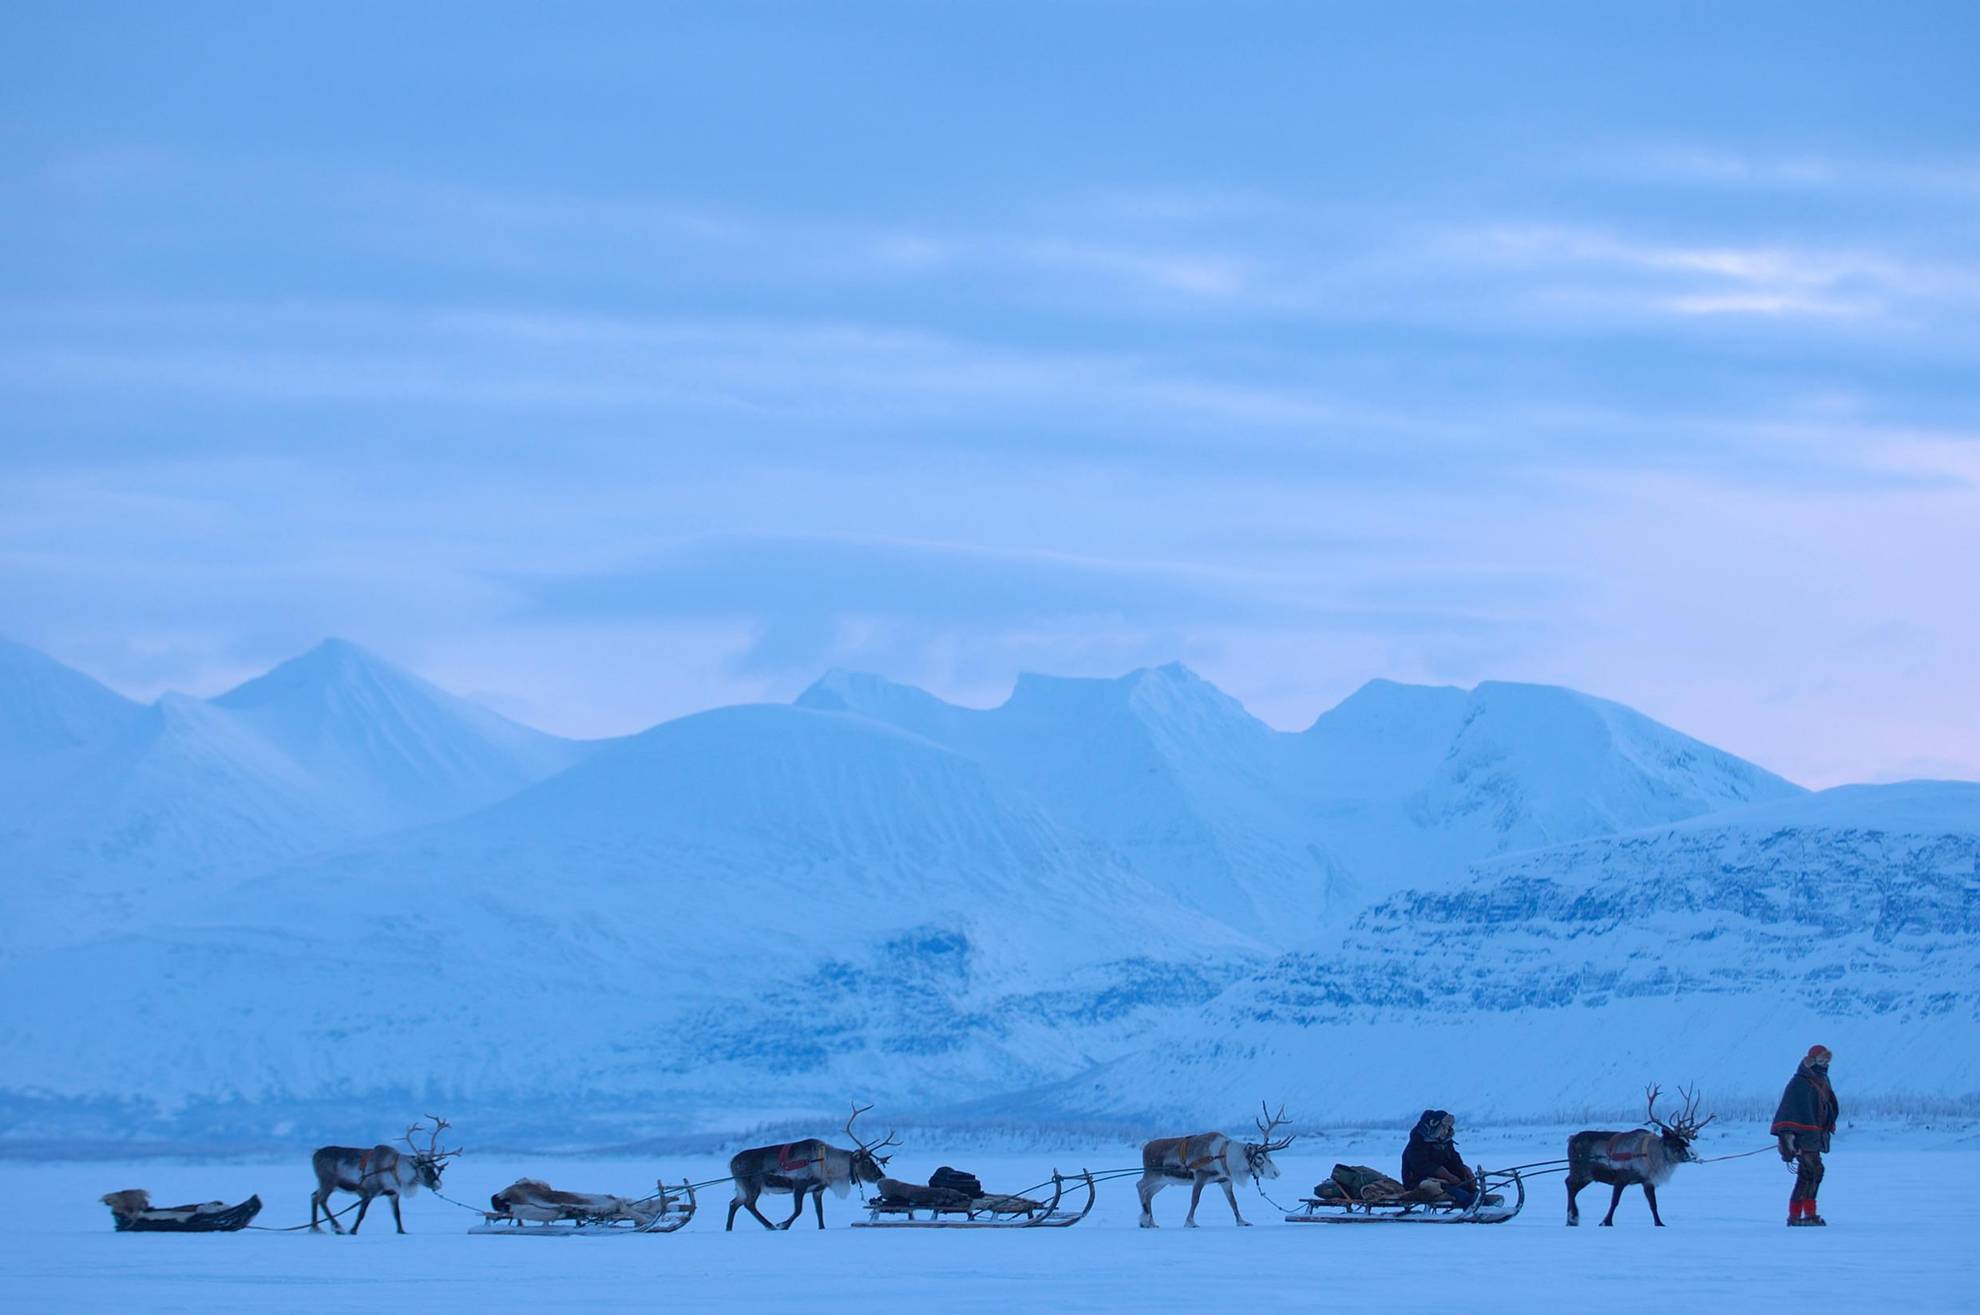 A man is leading a number of reindeer with sleds through a winter landscape of snow and ice.